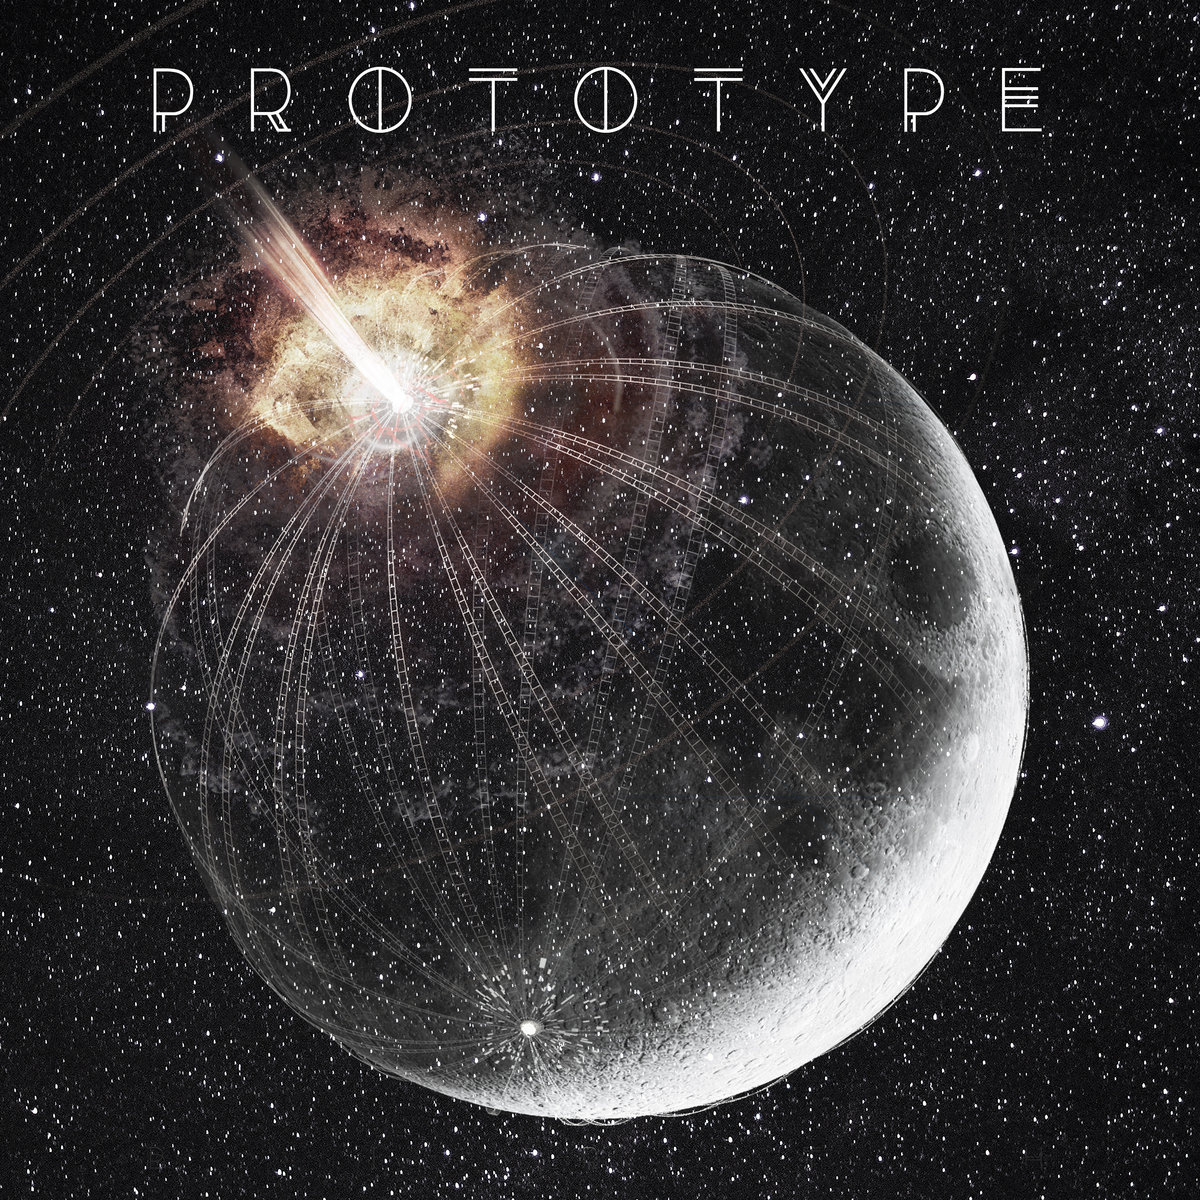 Large design of the moon in space, with a bright explosion near the top. Stylized text in the frame reads, "PROTOTYPE"